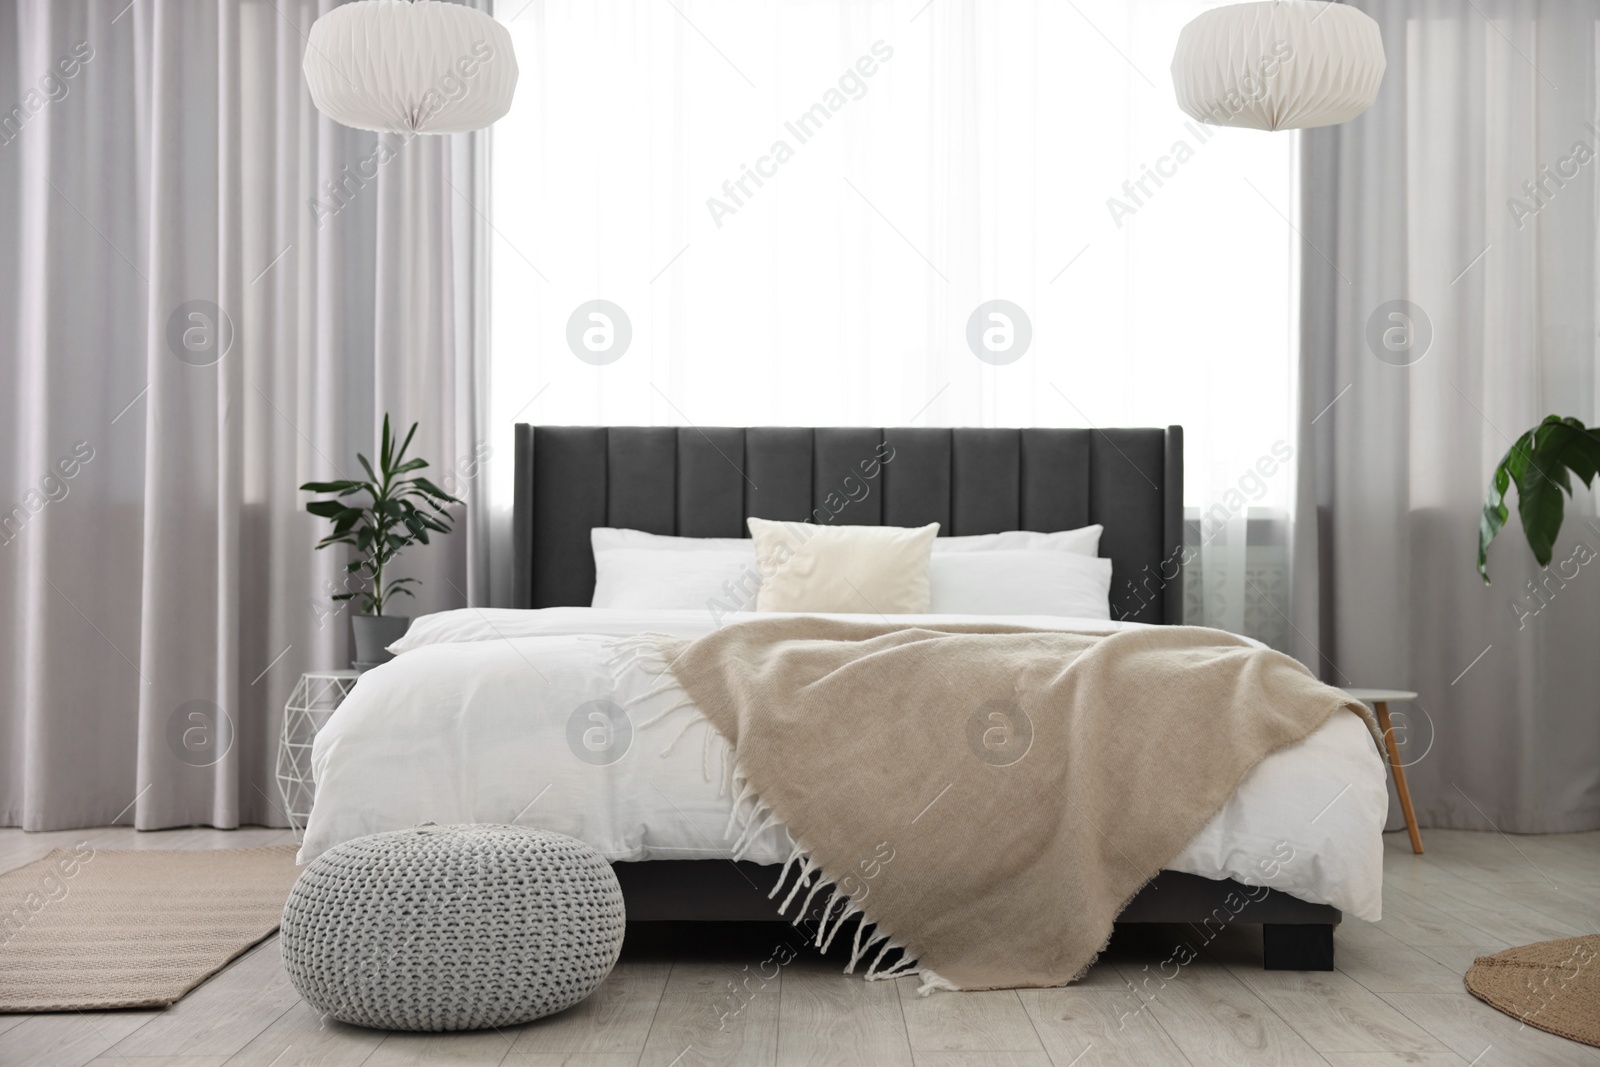 Photo of Soft beige plaid on bed in stylish bedroom. Interior design